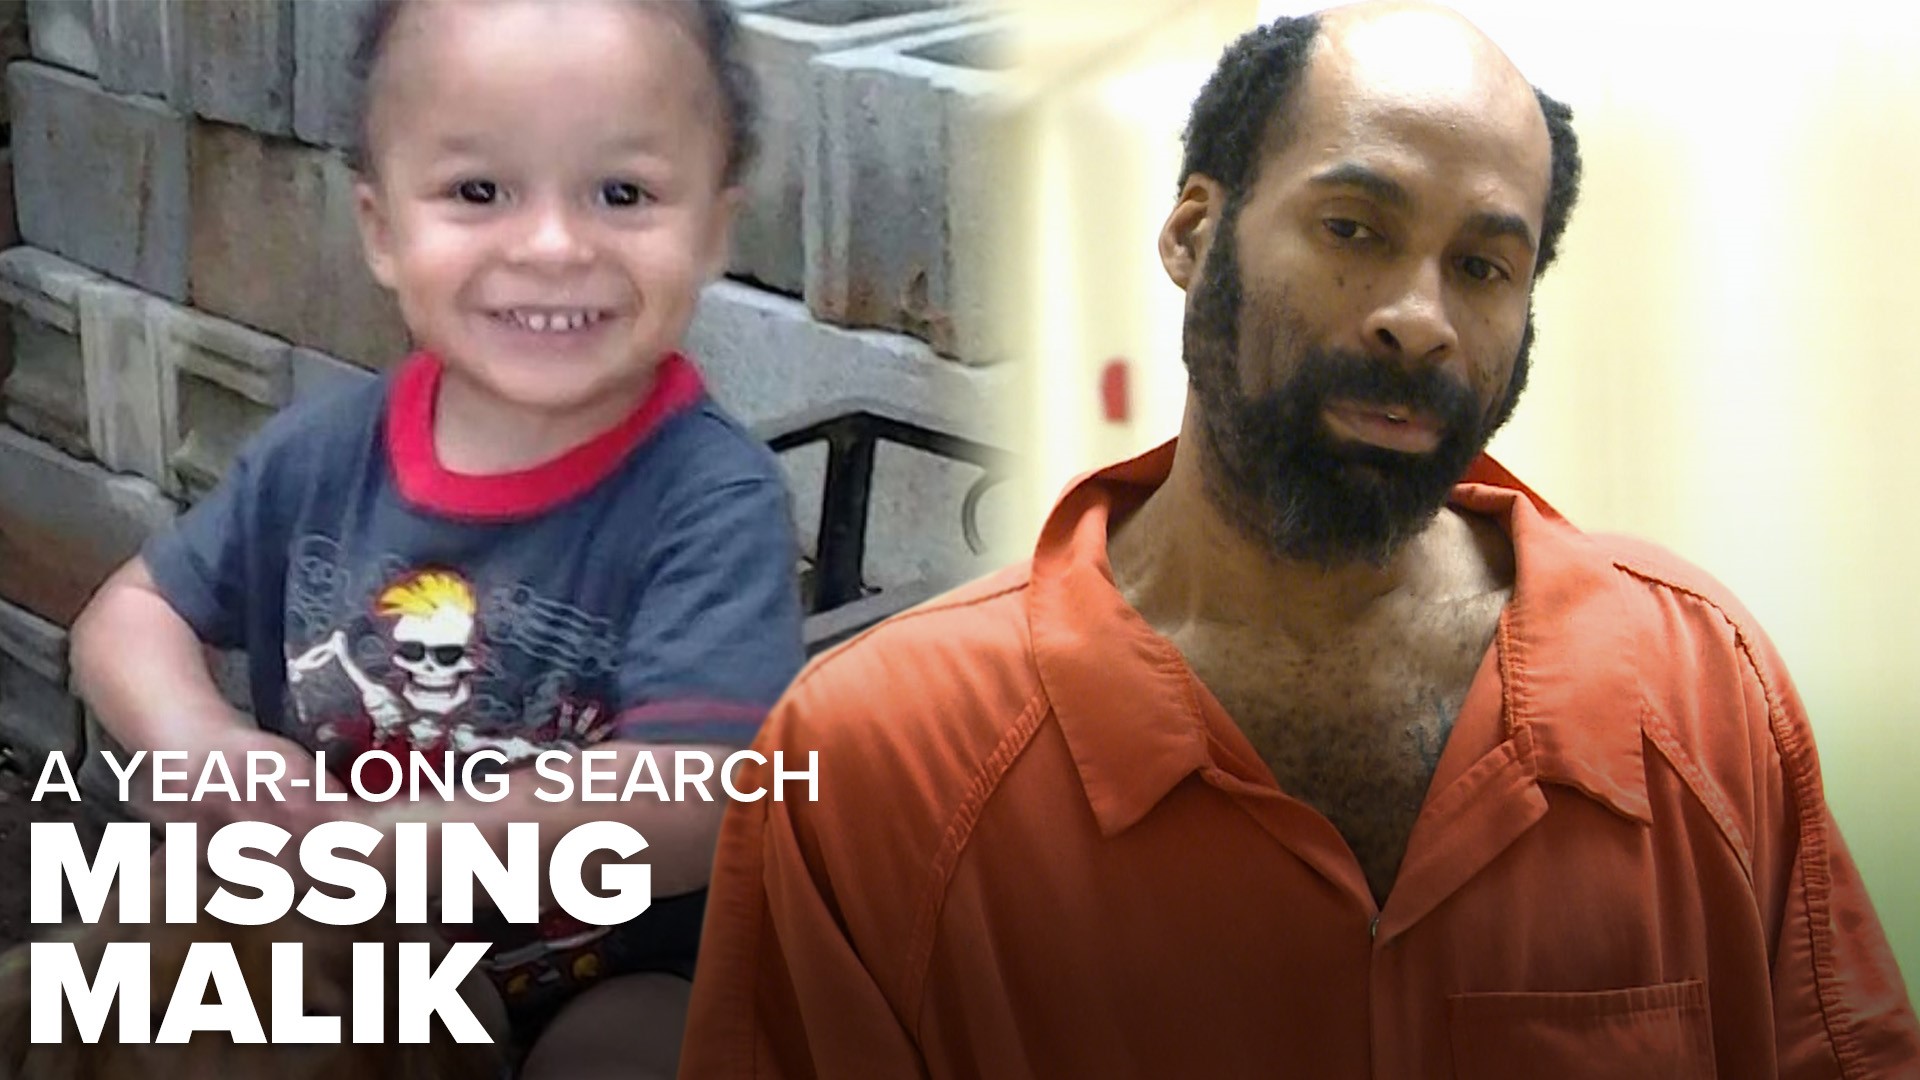 On Nov. 23, 2014, 2-year-old Malik Drummond was reported missing by his father and roughly one year later his father, Jeffery Clifton, was arrested for the murder.